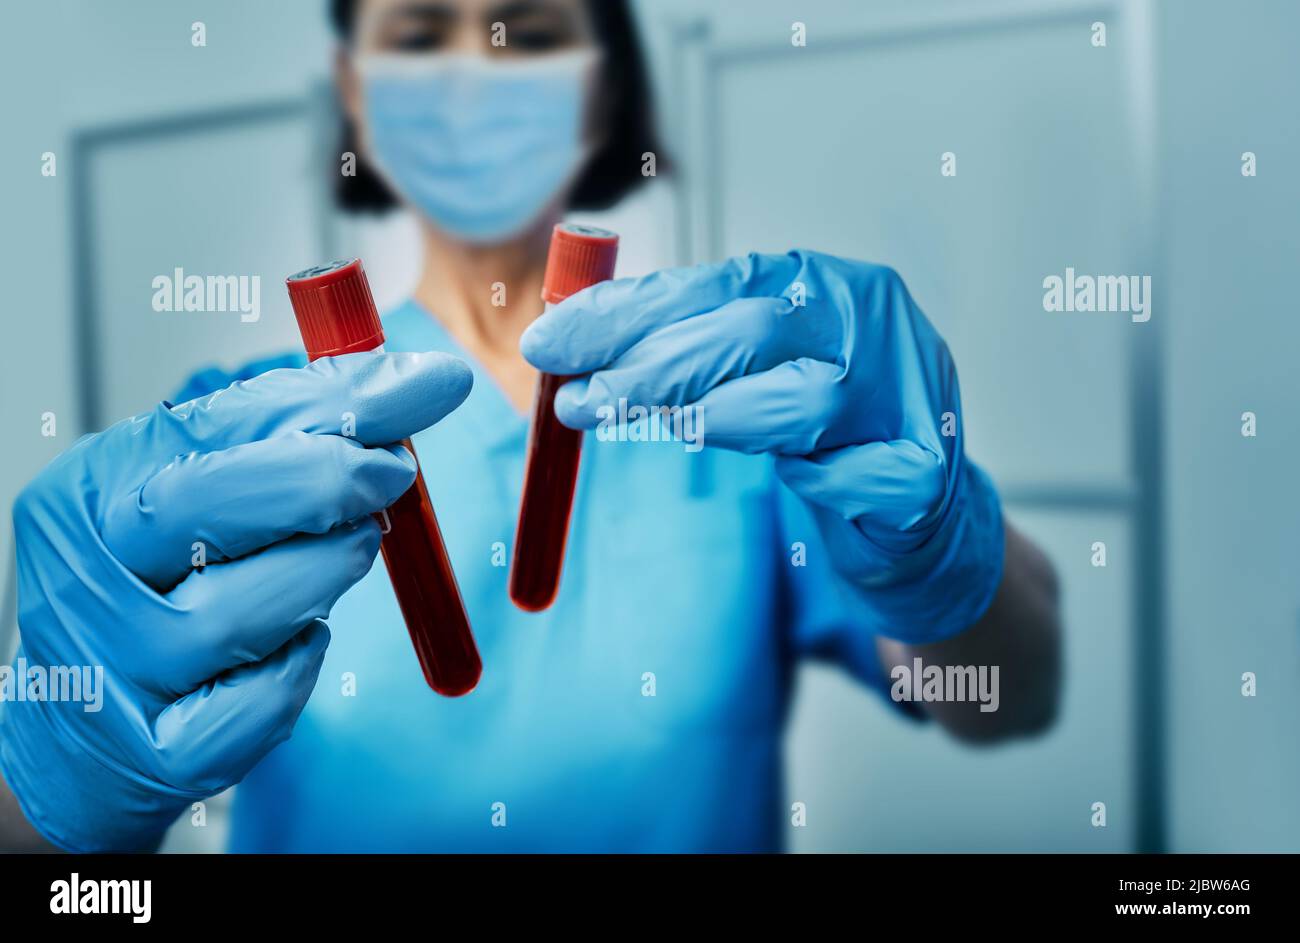 Blood sample tubes with blood infected Monkeypox virus in laboratory assistant hands, close-up Stock Photo